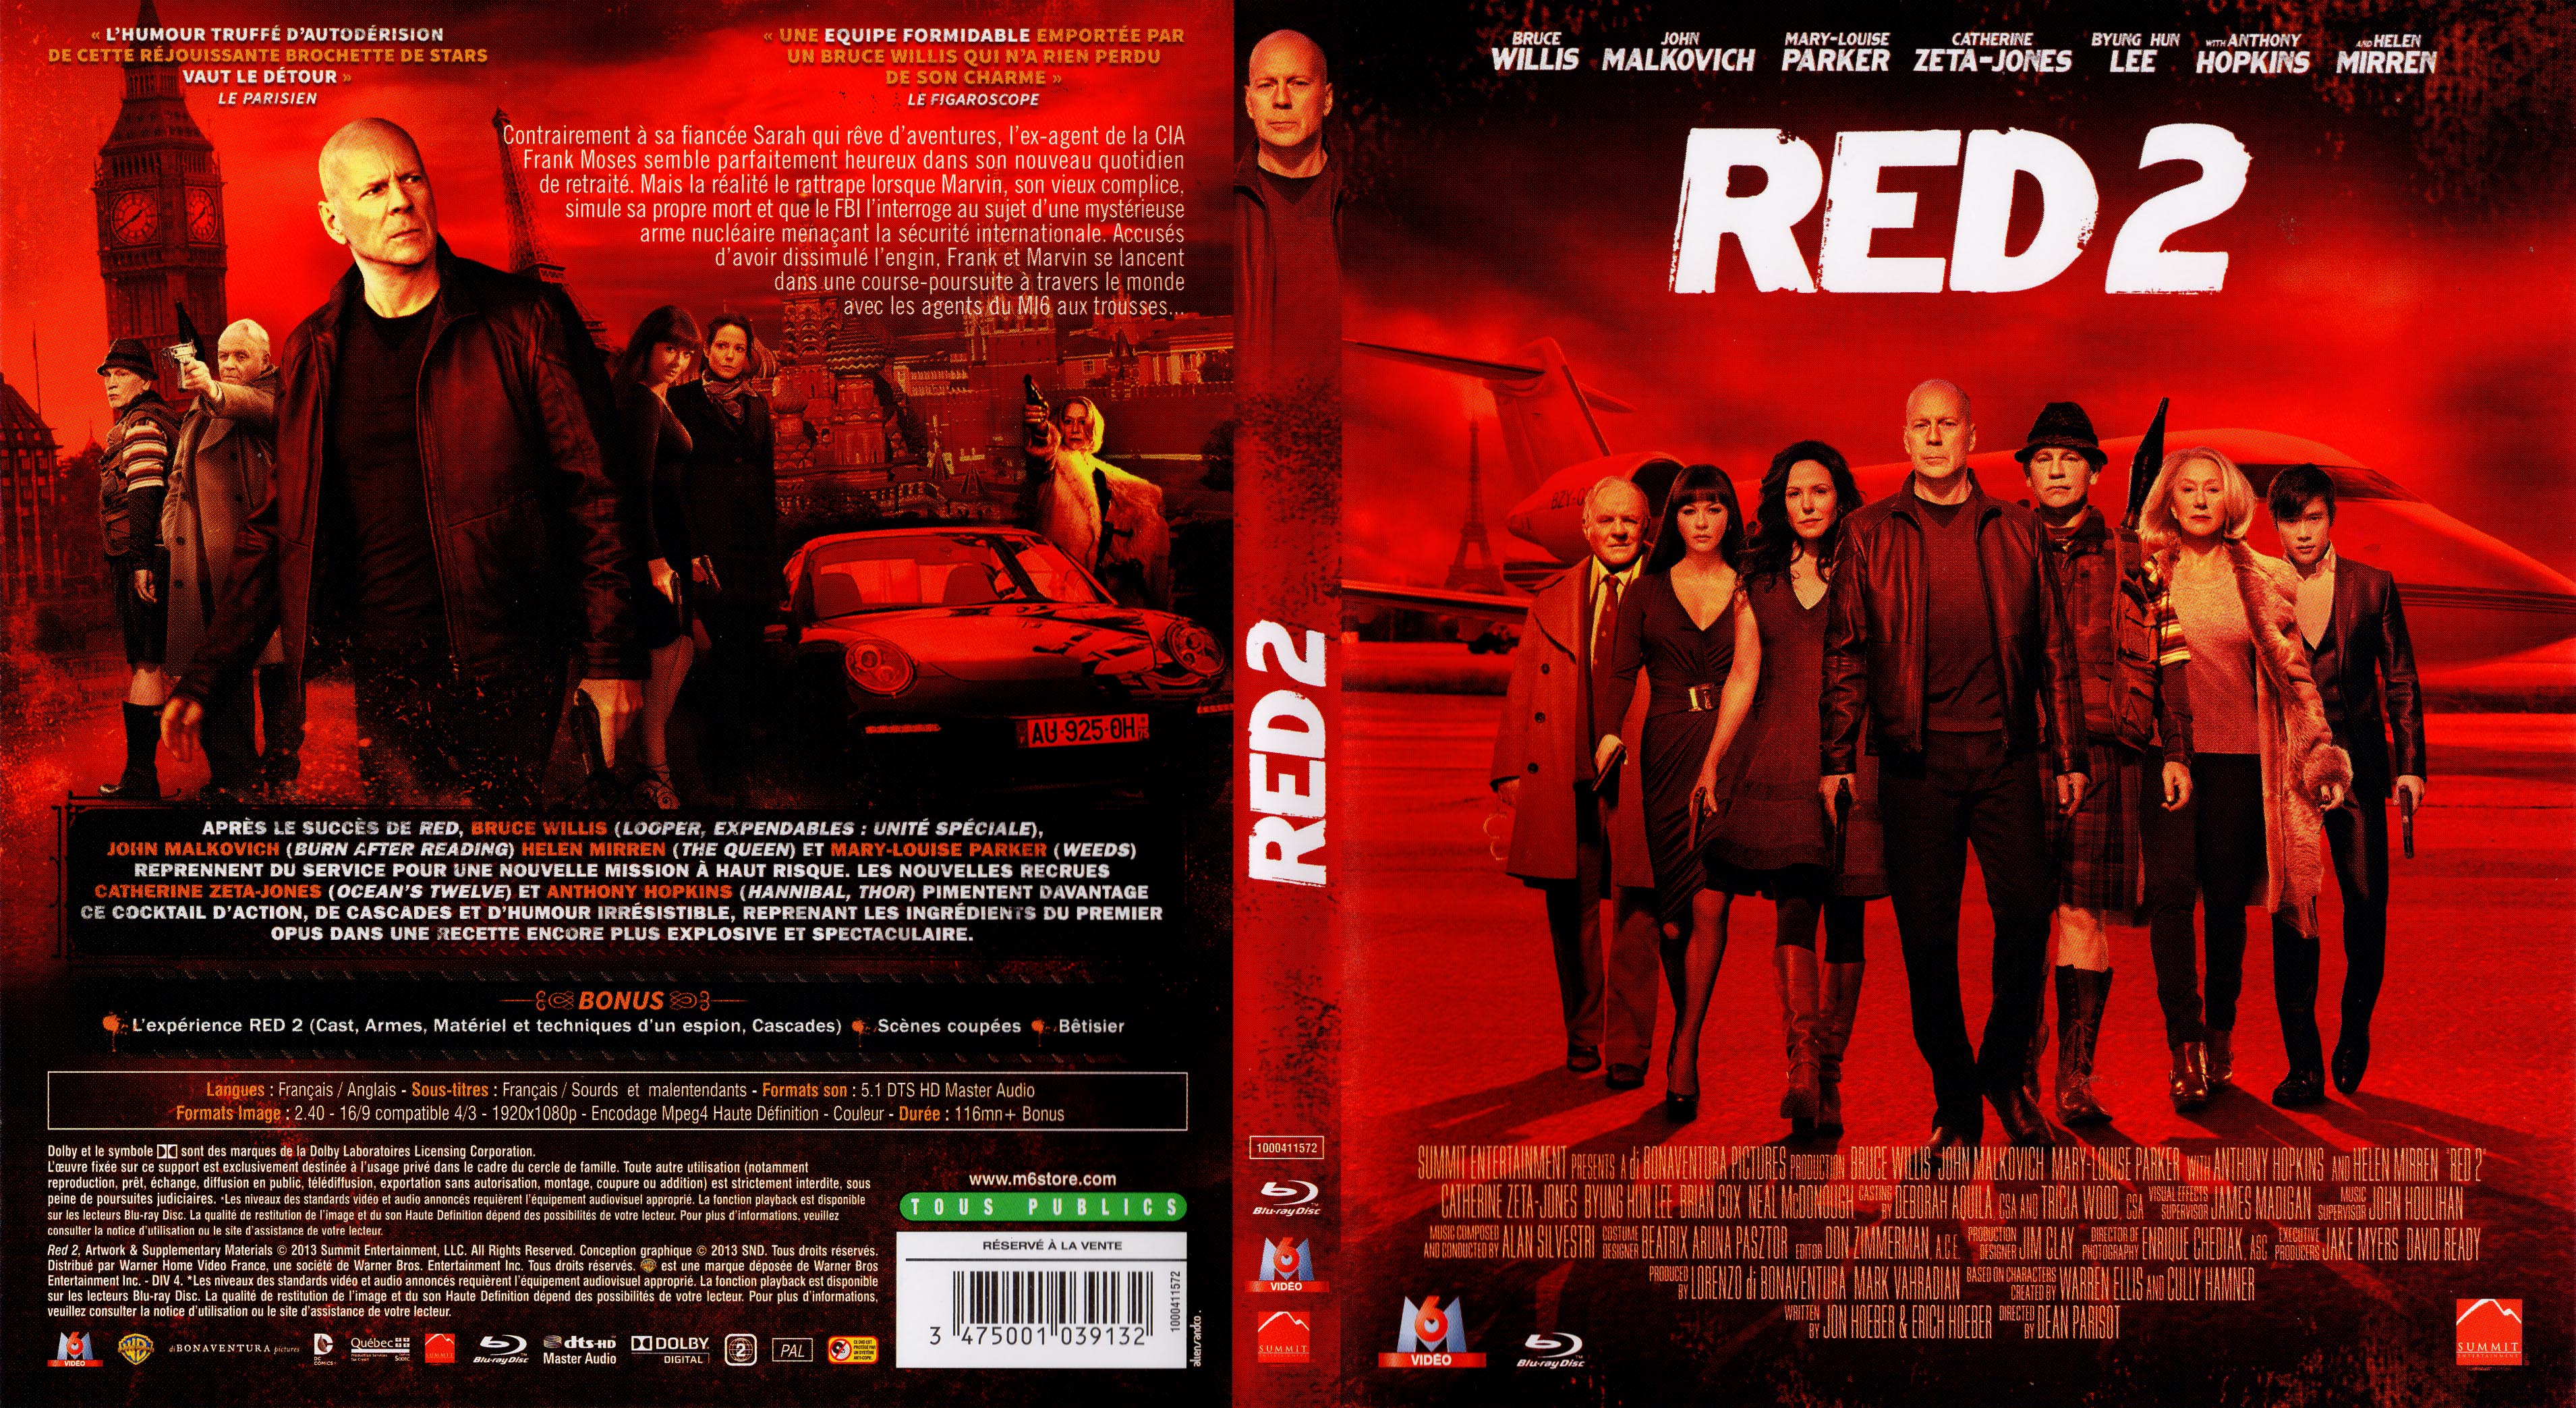 Jaquette DVD Red 2 (BLU-RAY)